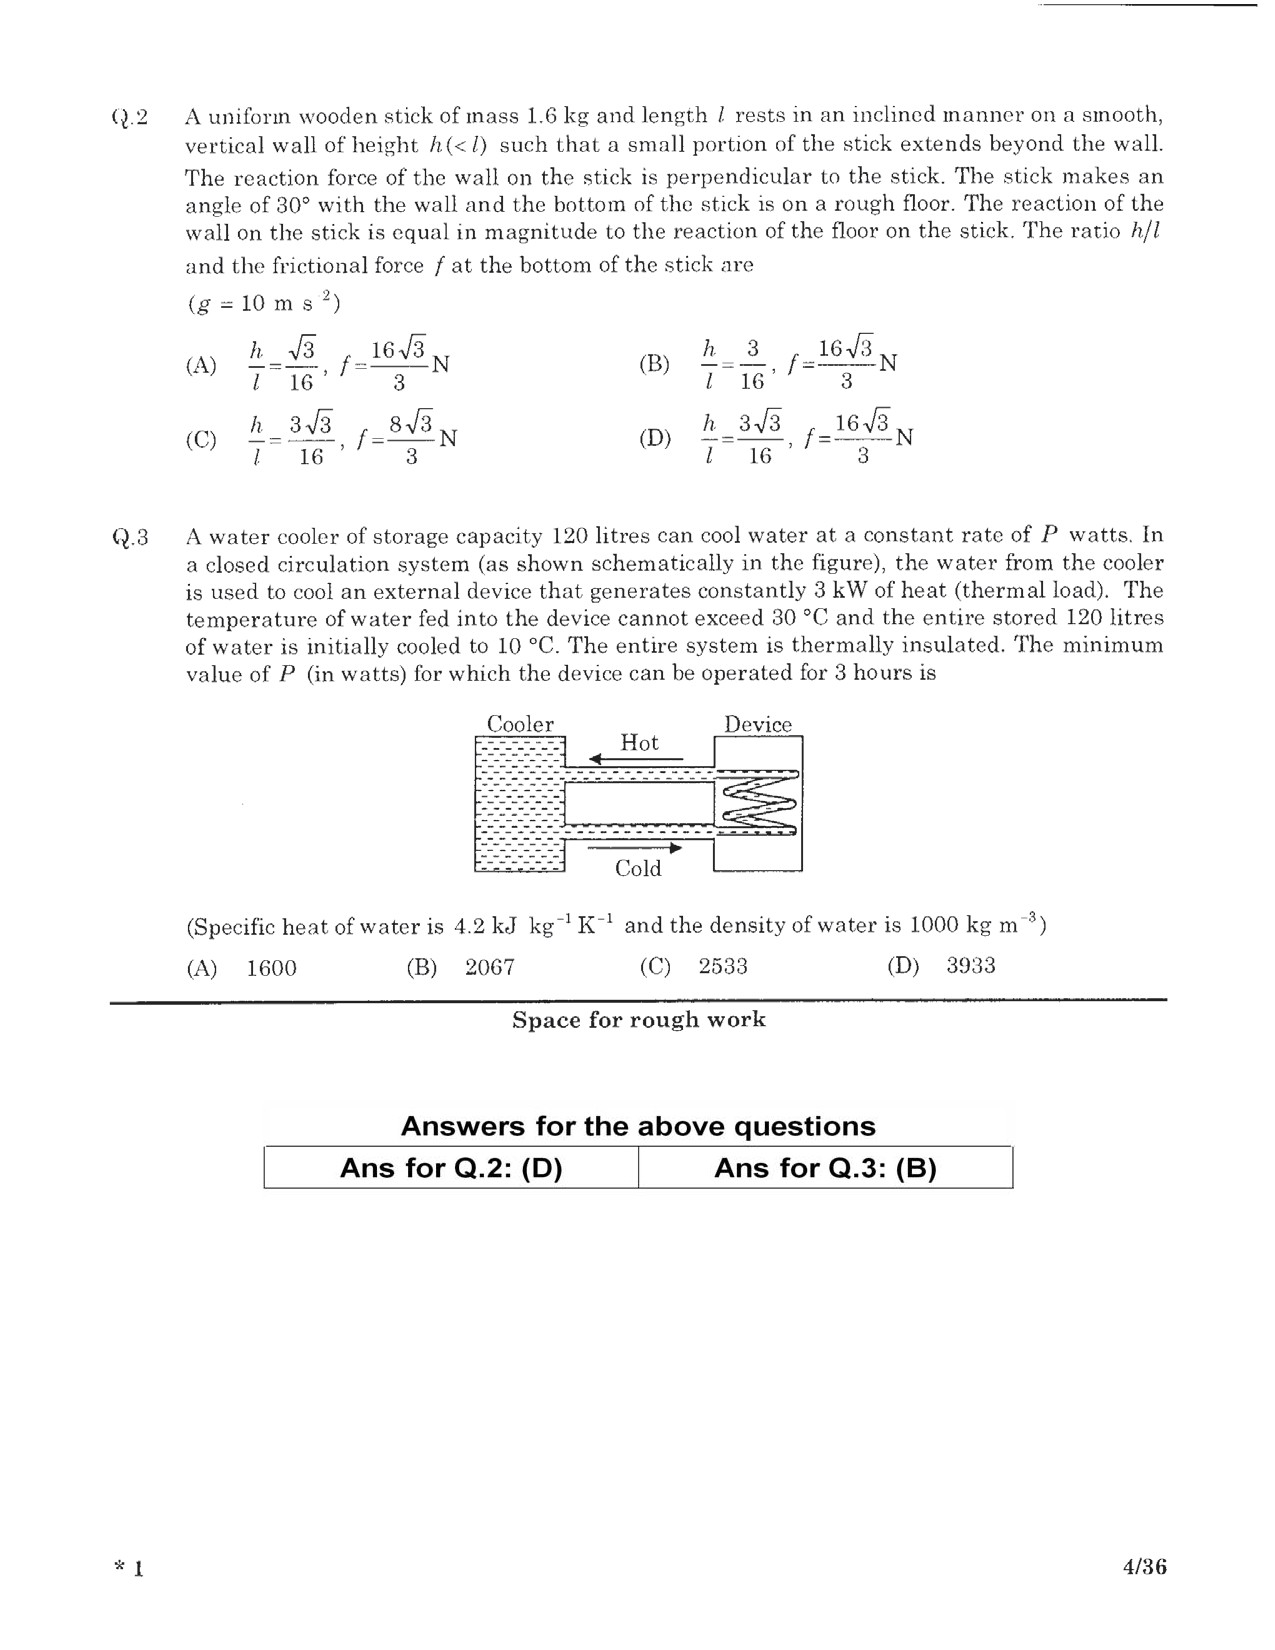 JEE Advanced Exam Question Paper 2016 Paper 1 Physics 2